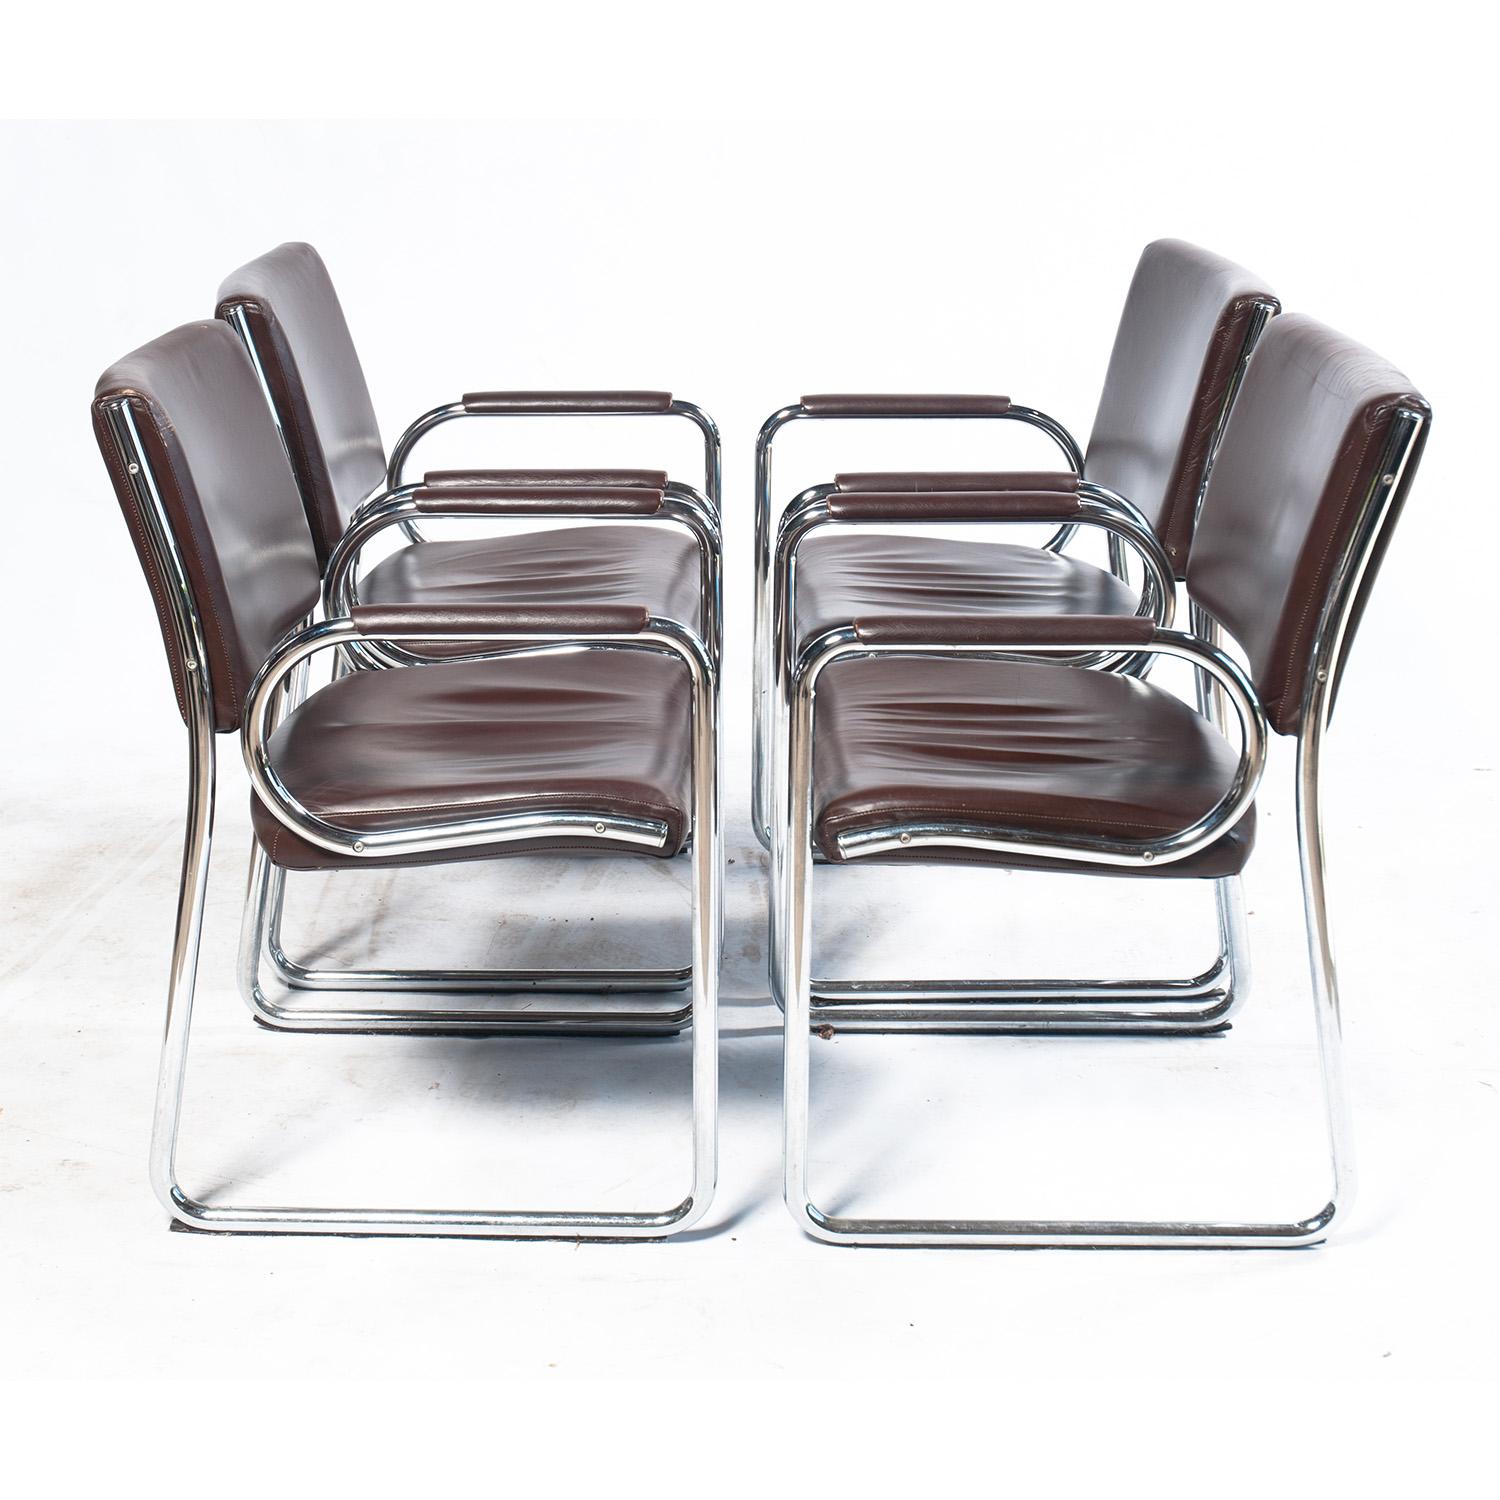 Vintage chocolate brown leather and chrome dining chairs with runner covers for smooth sliding over floors. Very comfortable.

Set of four.